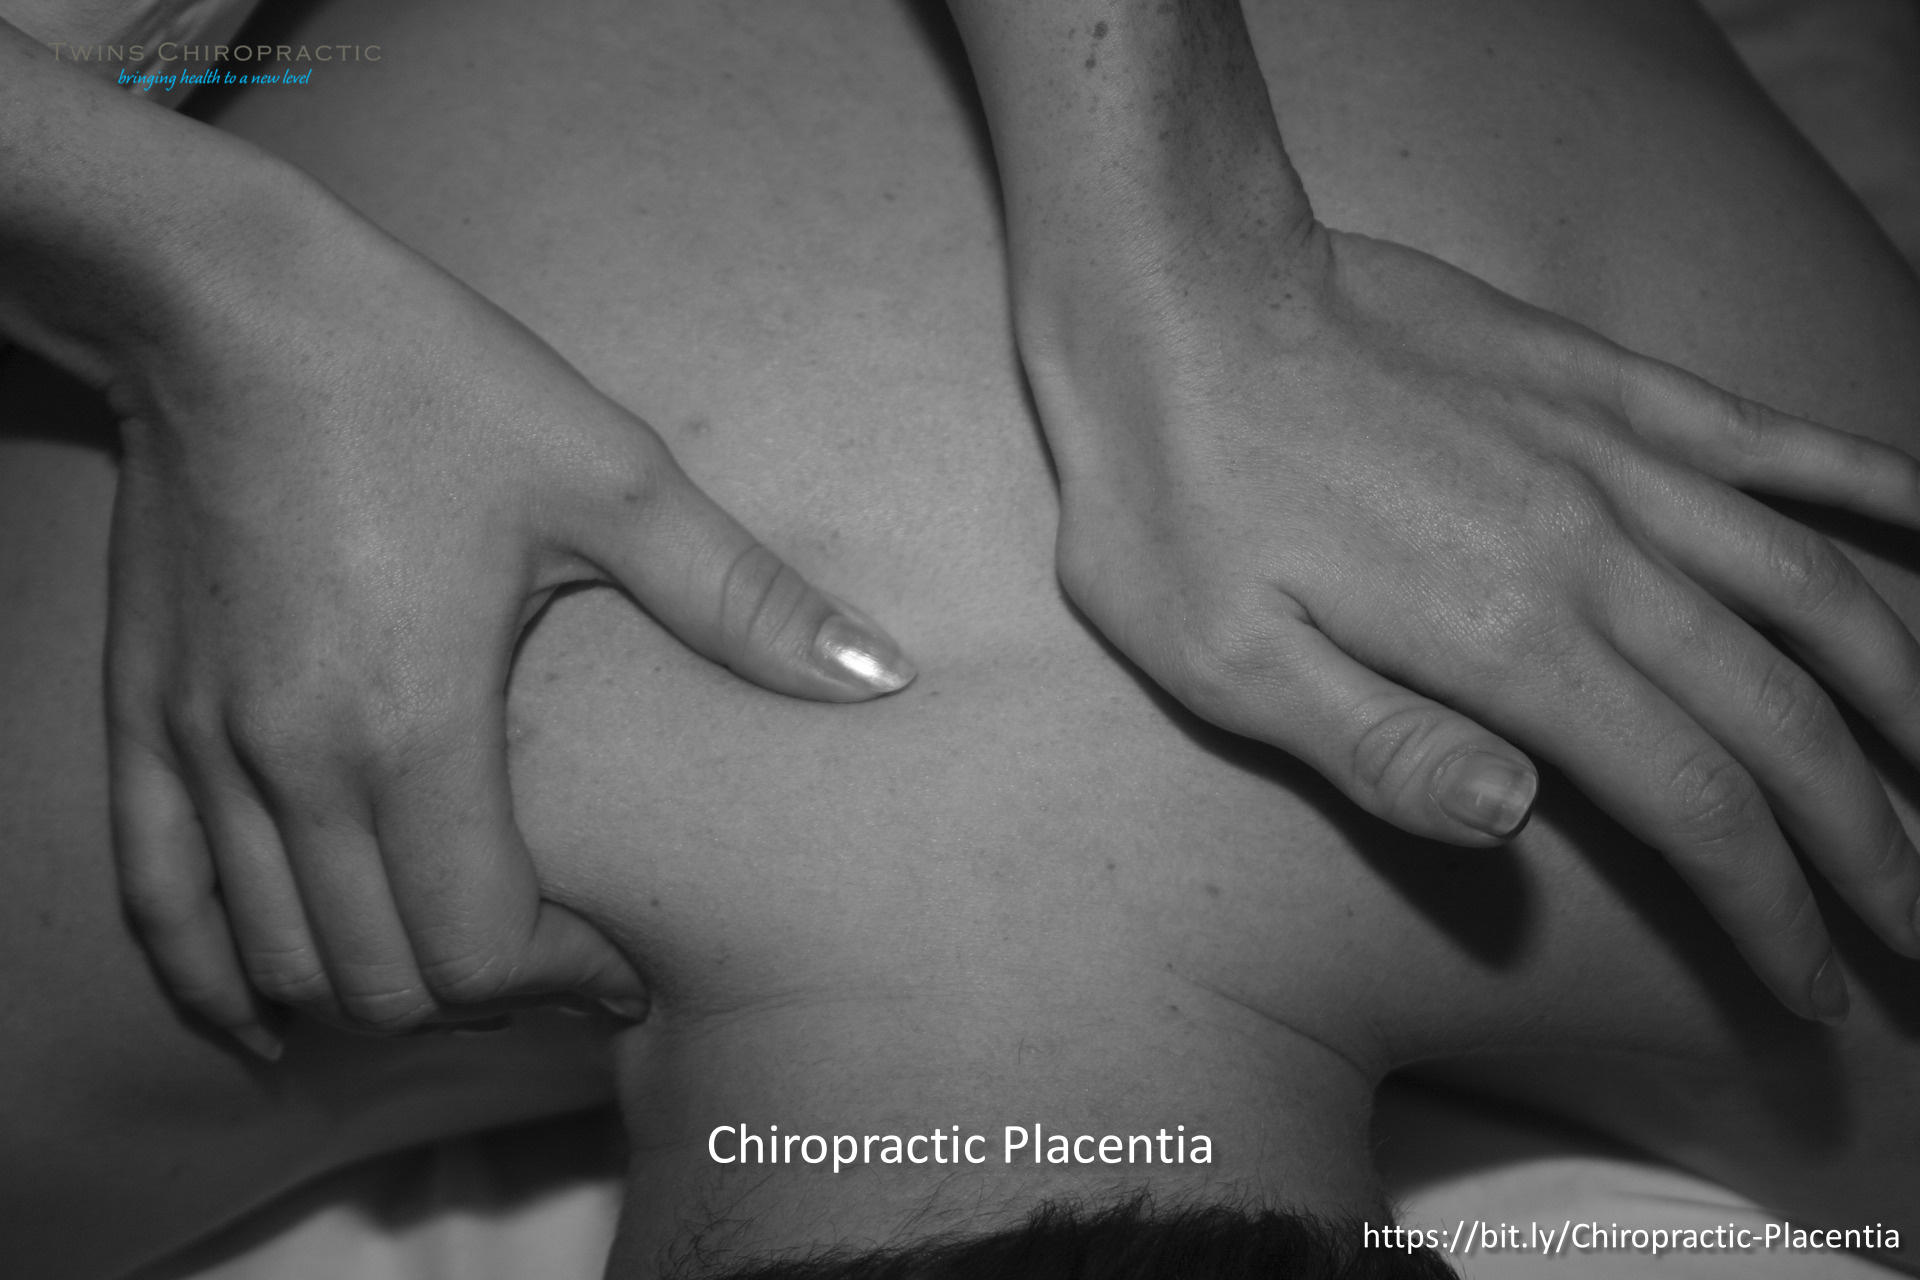 Twins Chiropractic Explains their Treatment Procedure for New Patients